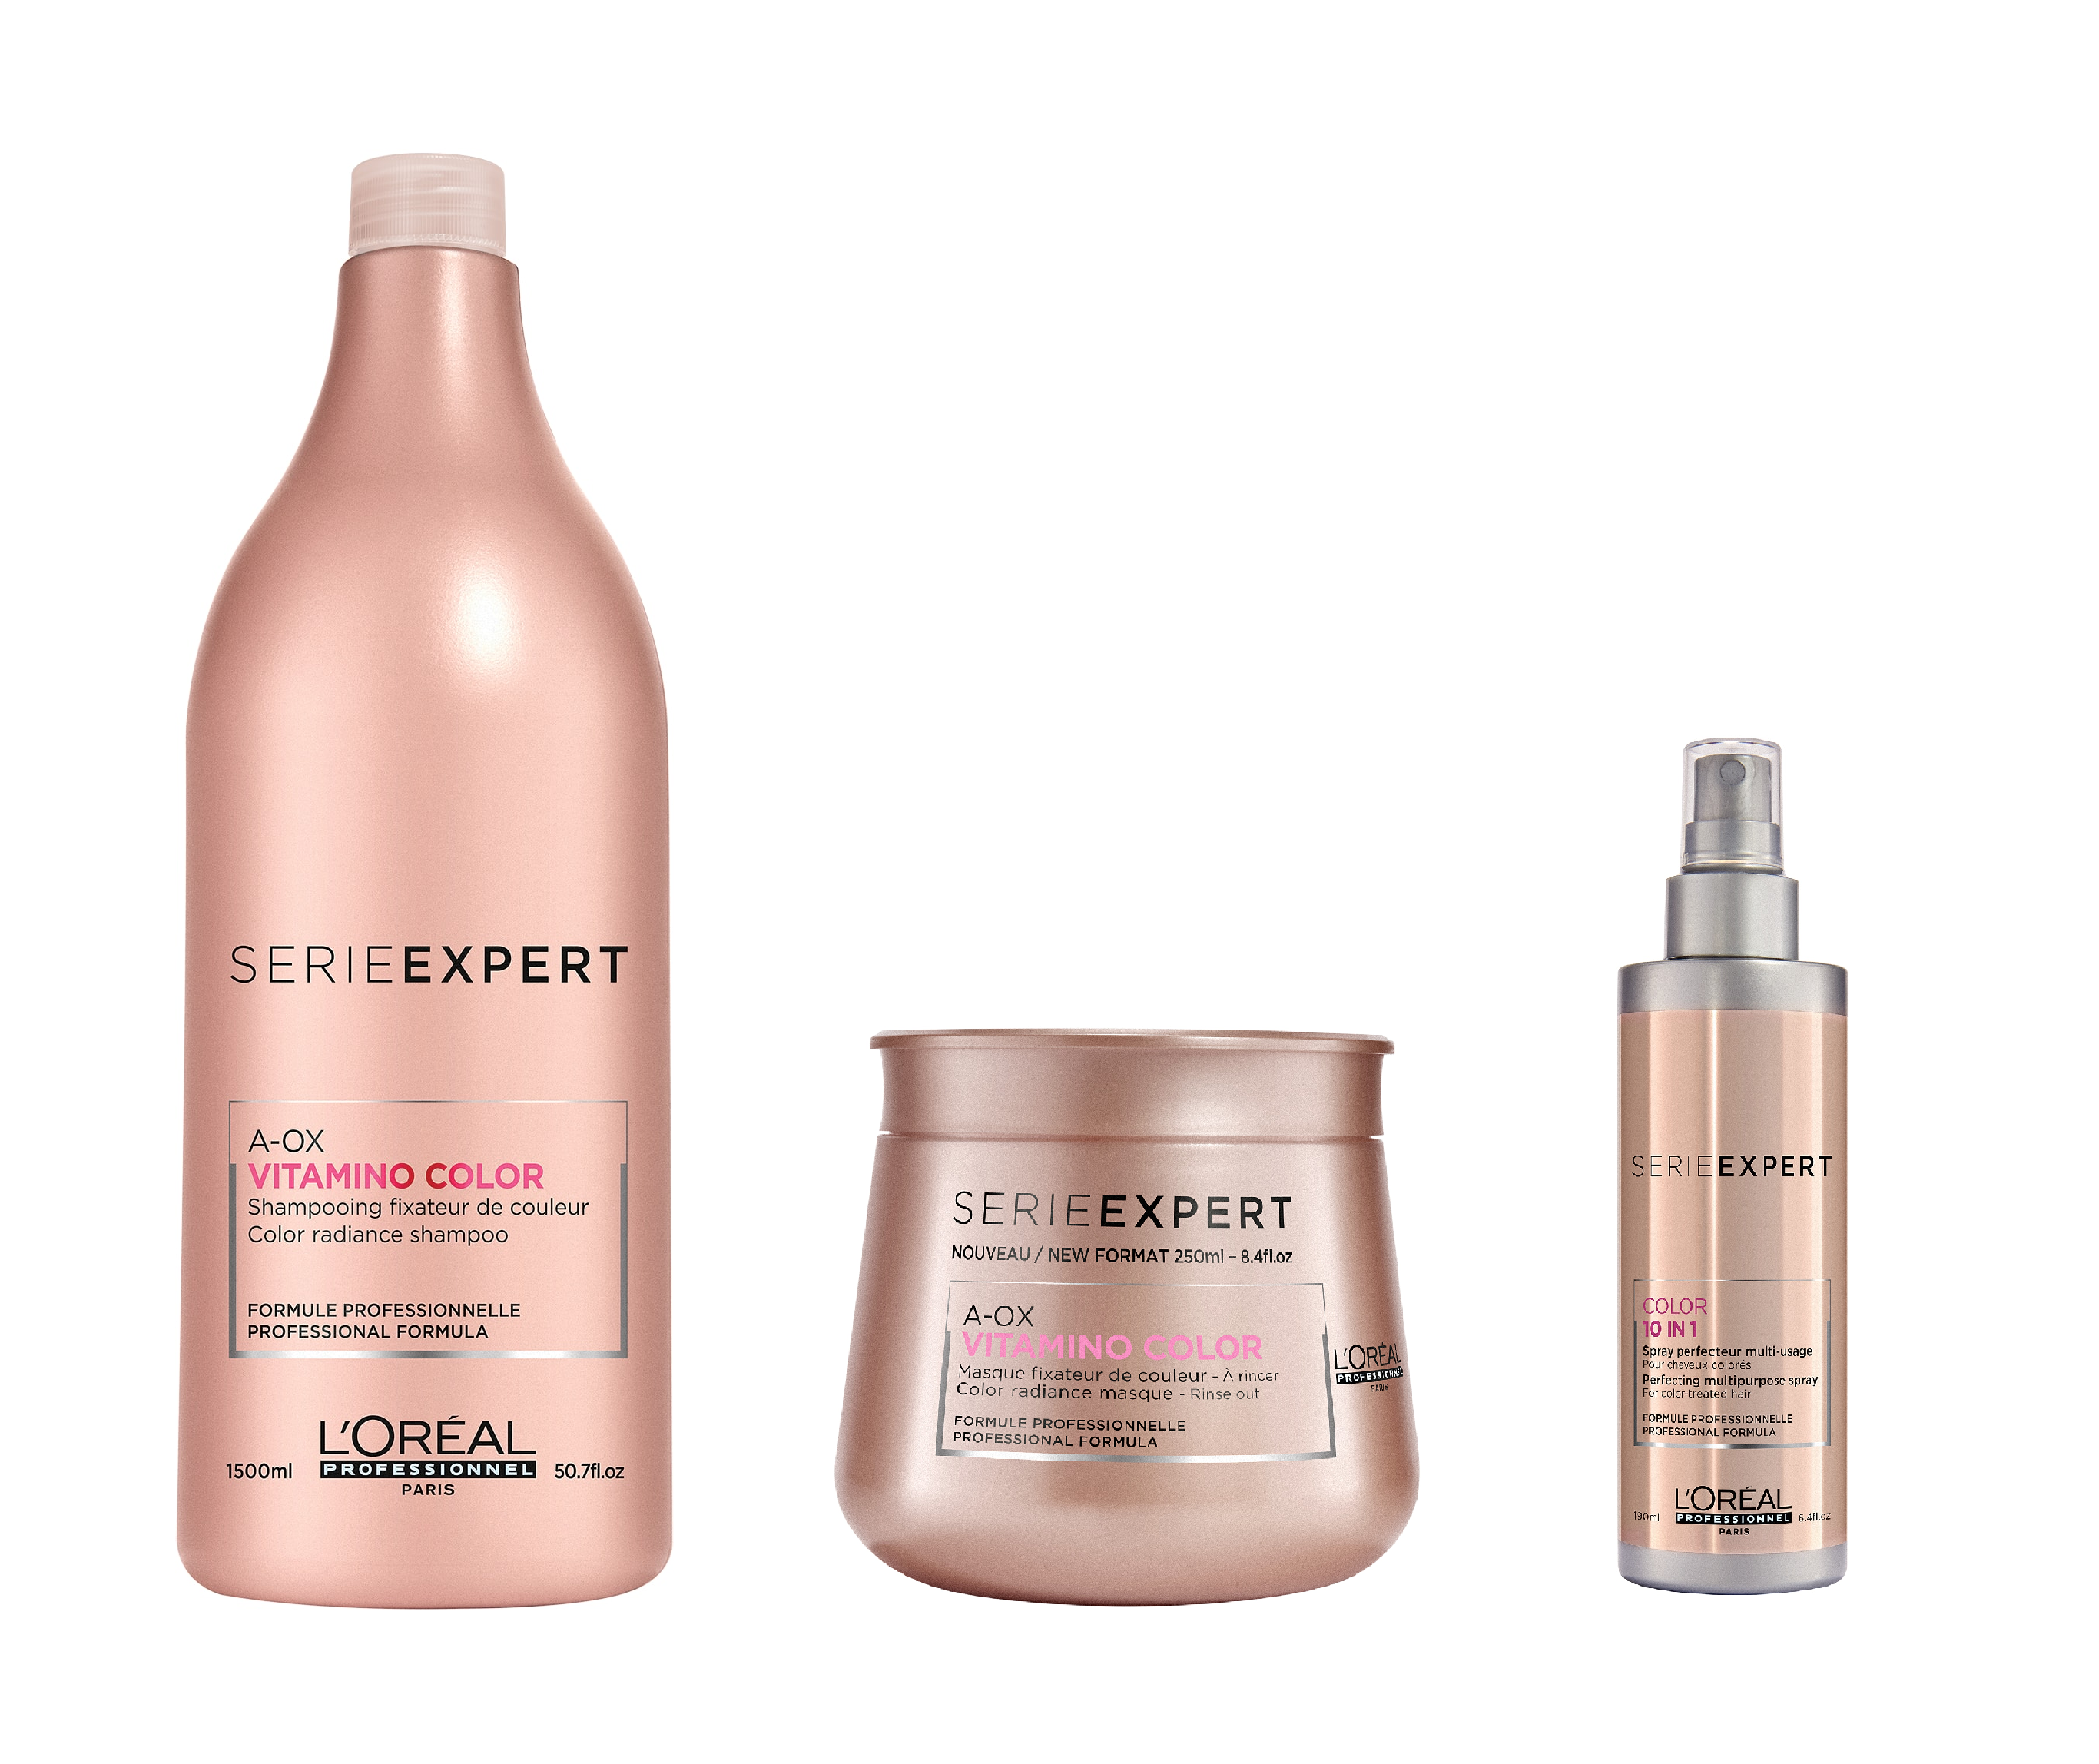 L’Oreal Serie Expert Vitamino Color A-OX Shampoo 1500ml, Masque 250ml and Leave In Perfecting Spray 190ml